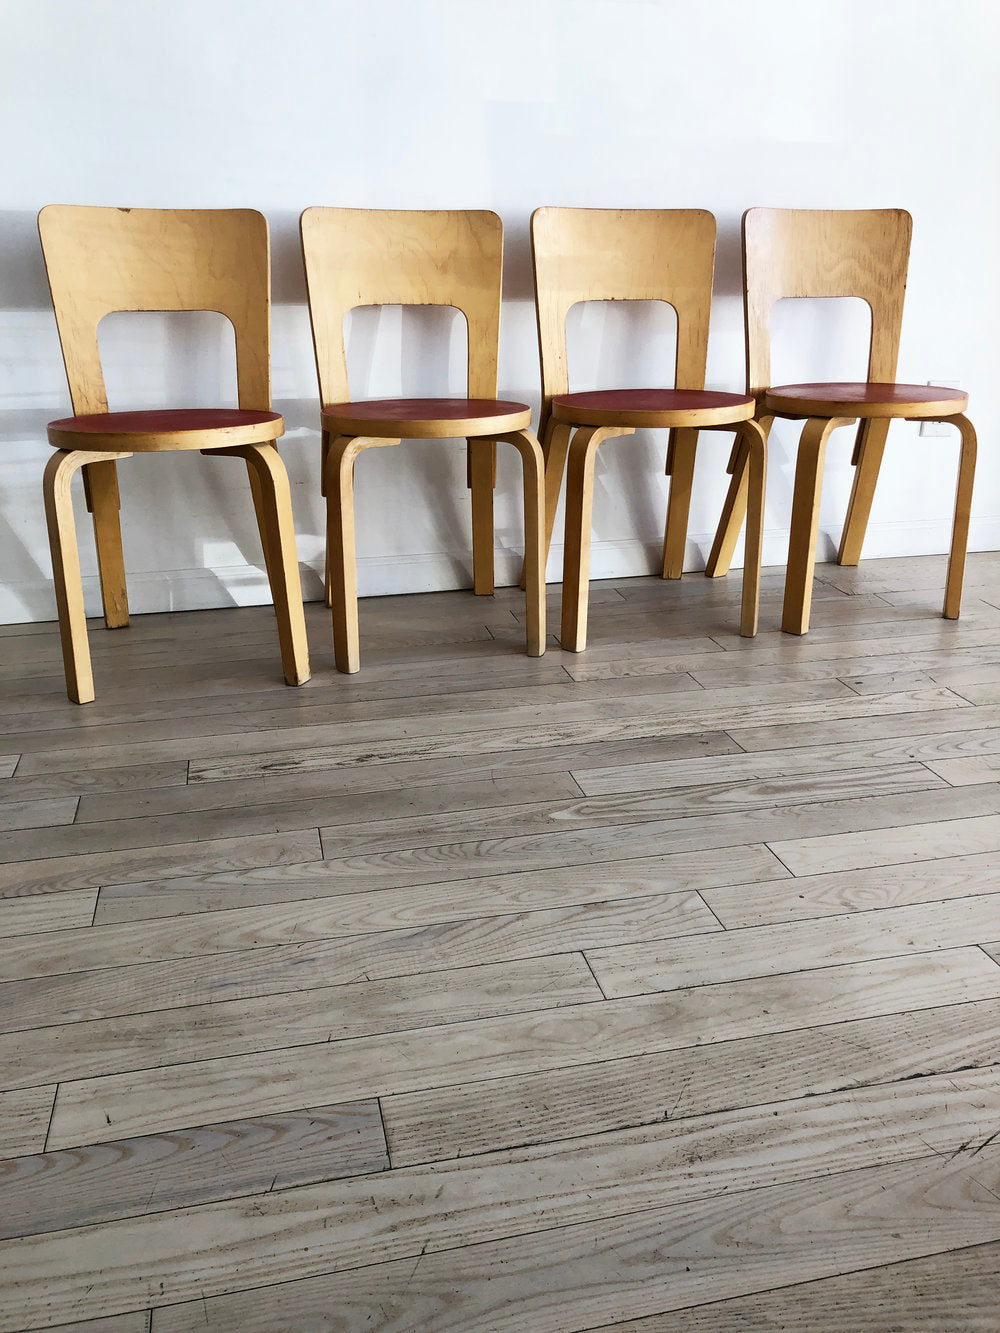 Super Old Alvar Aalto Set of 4 Chair 66 Dining Chairs-SET